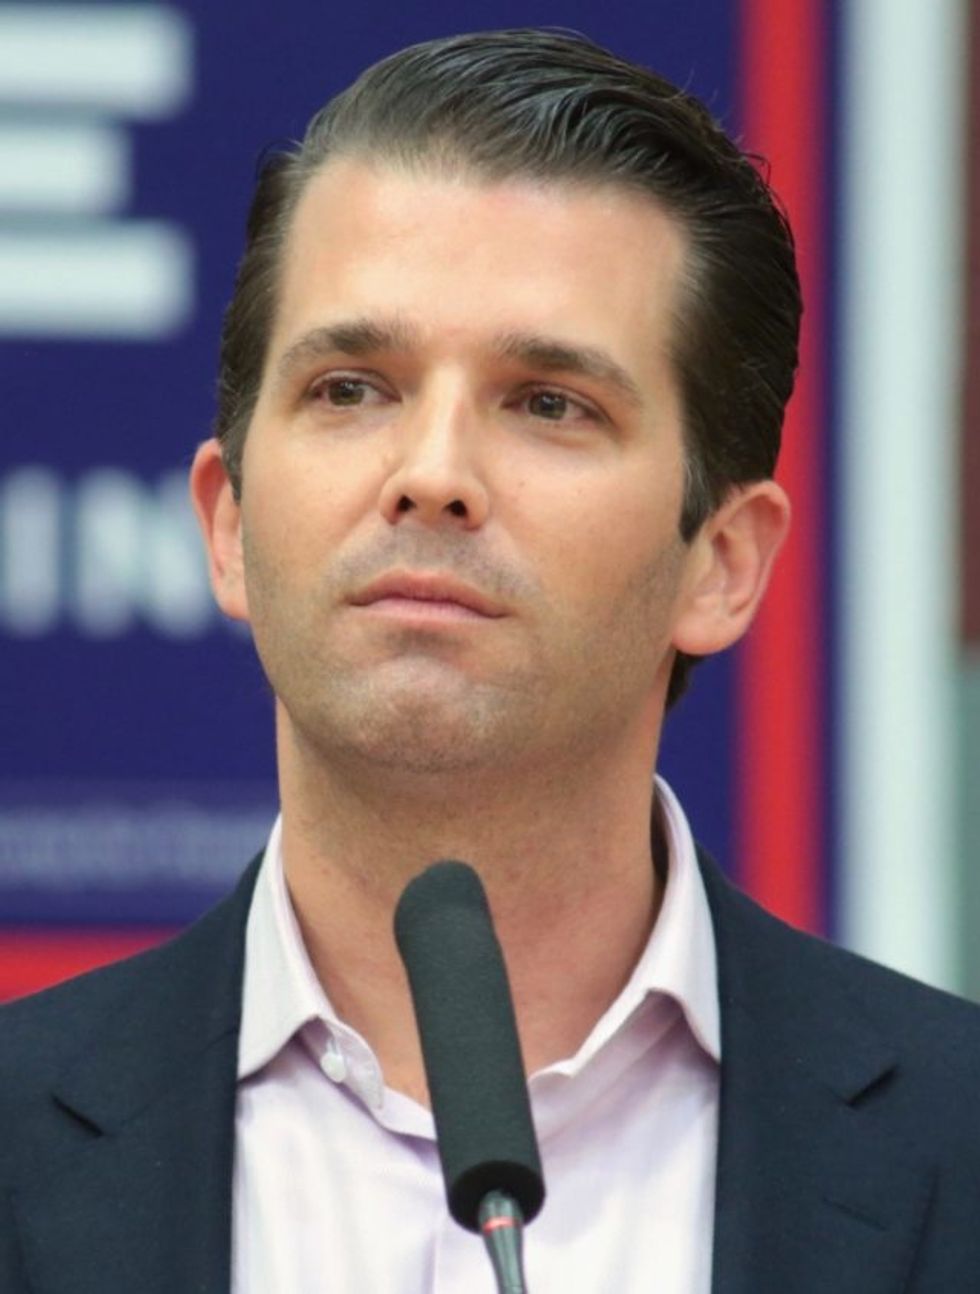 Why Donald Trump, Jr. Should Release More Emails